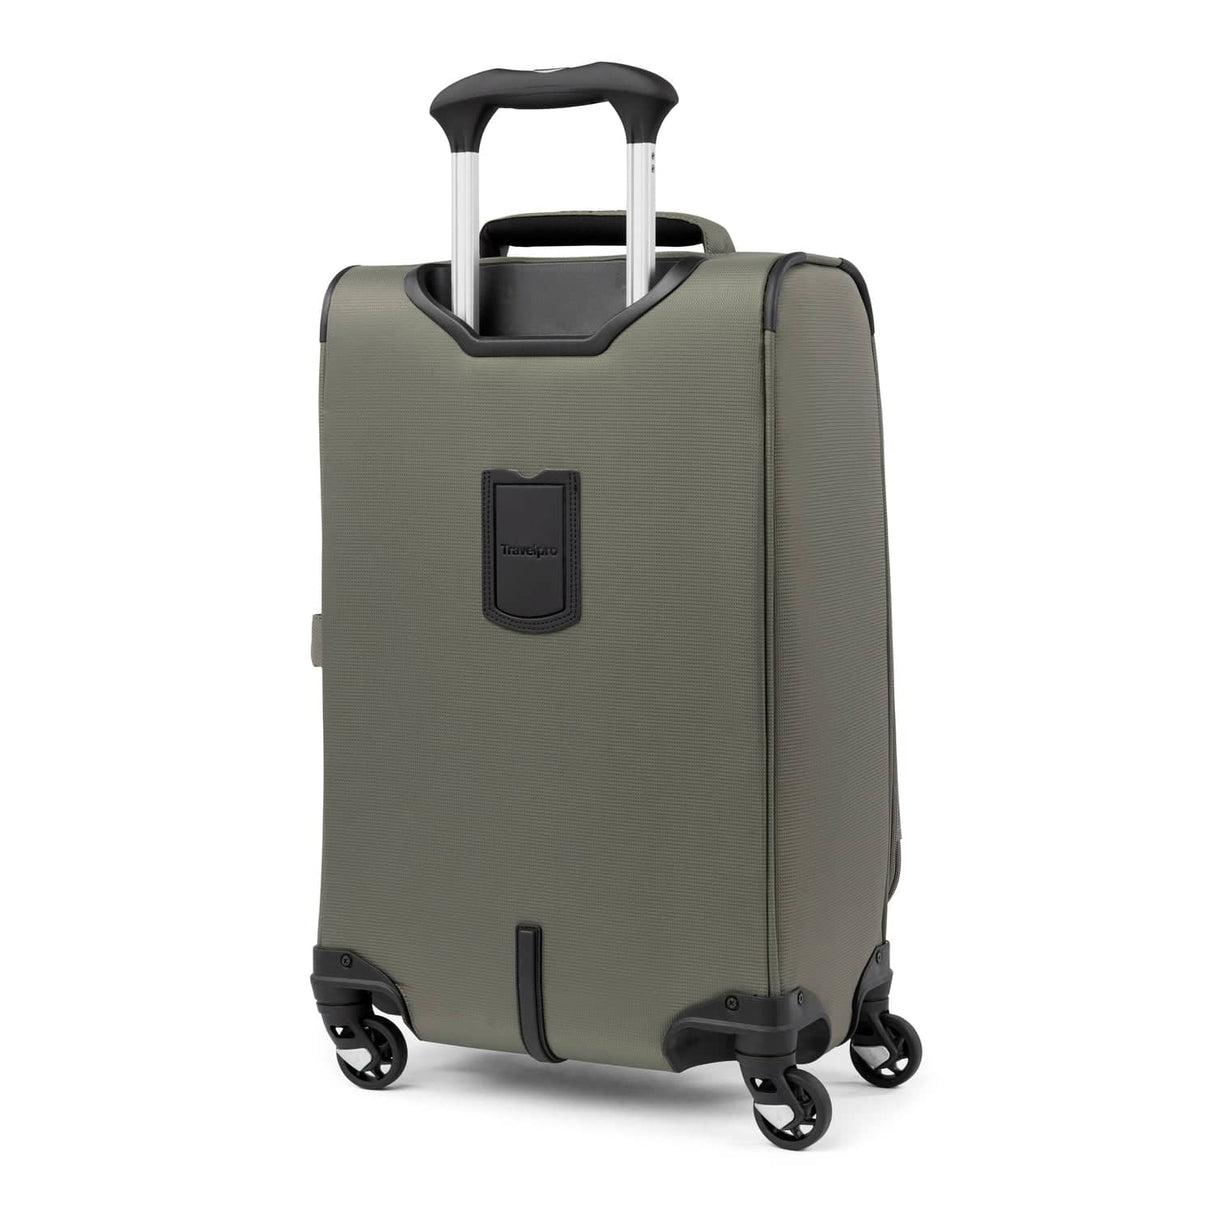 Travelpro Maxlite 5 21" Carry-On Expandable Spinner , , 401176106_back-1500x1500-f3a2c67_1024x1024_2x_f6e44831-e71f-470f-96c4-7057421fe8ab